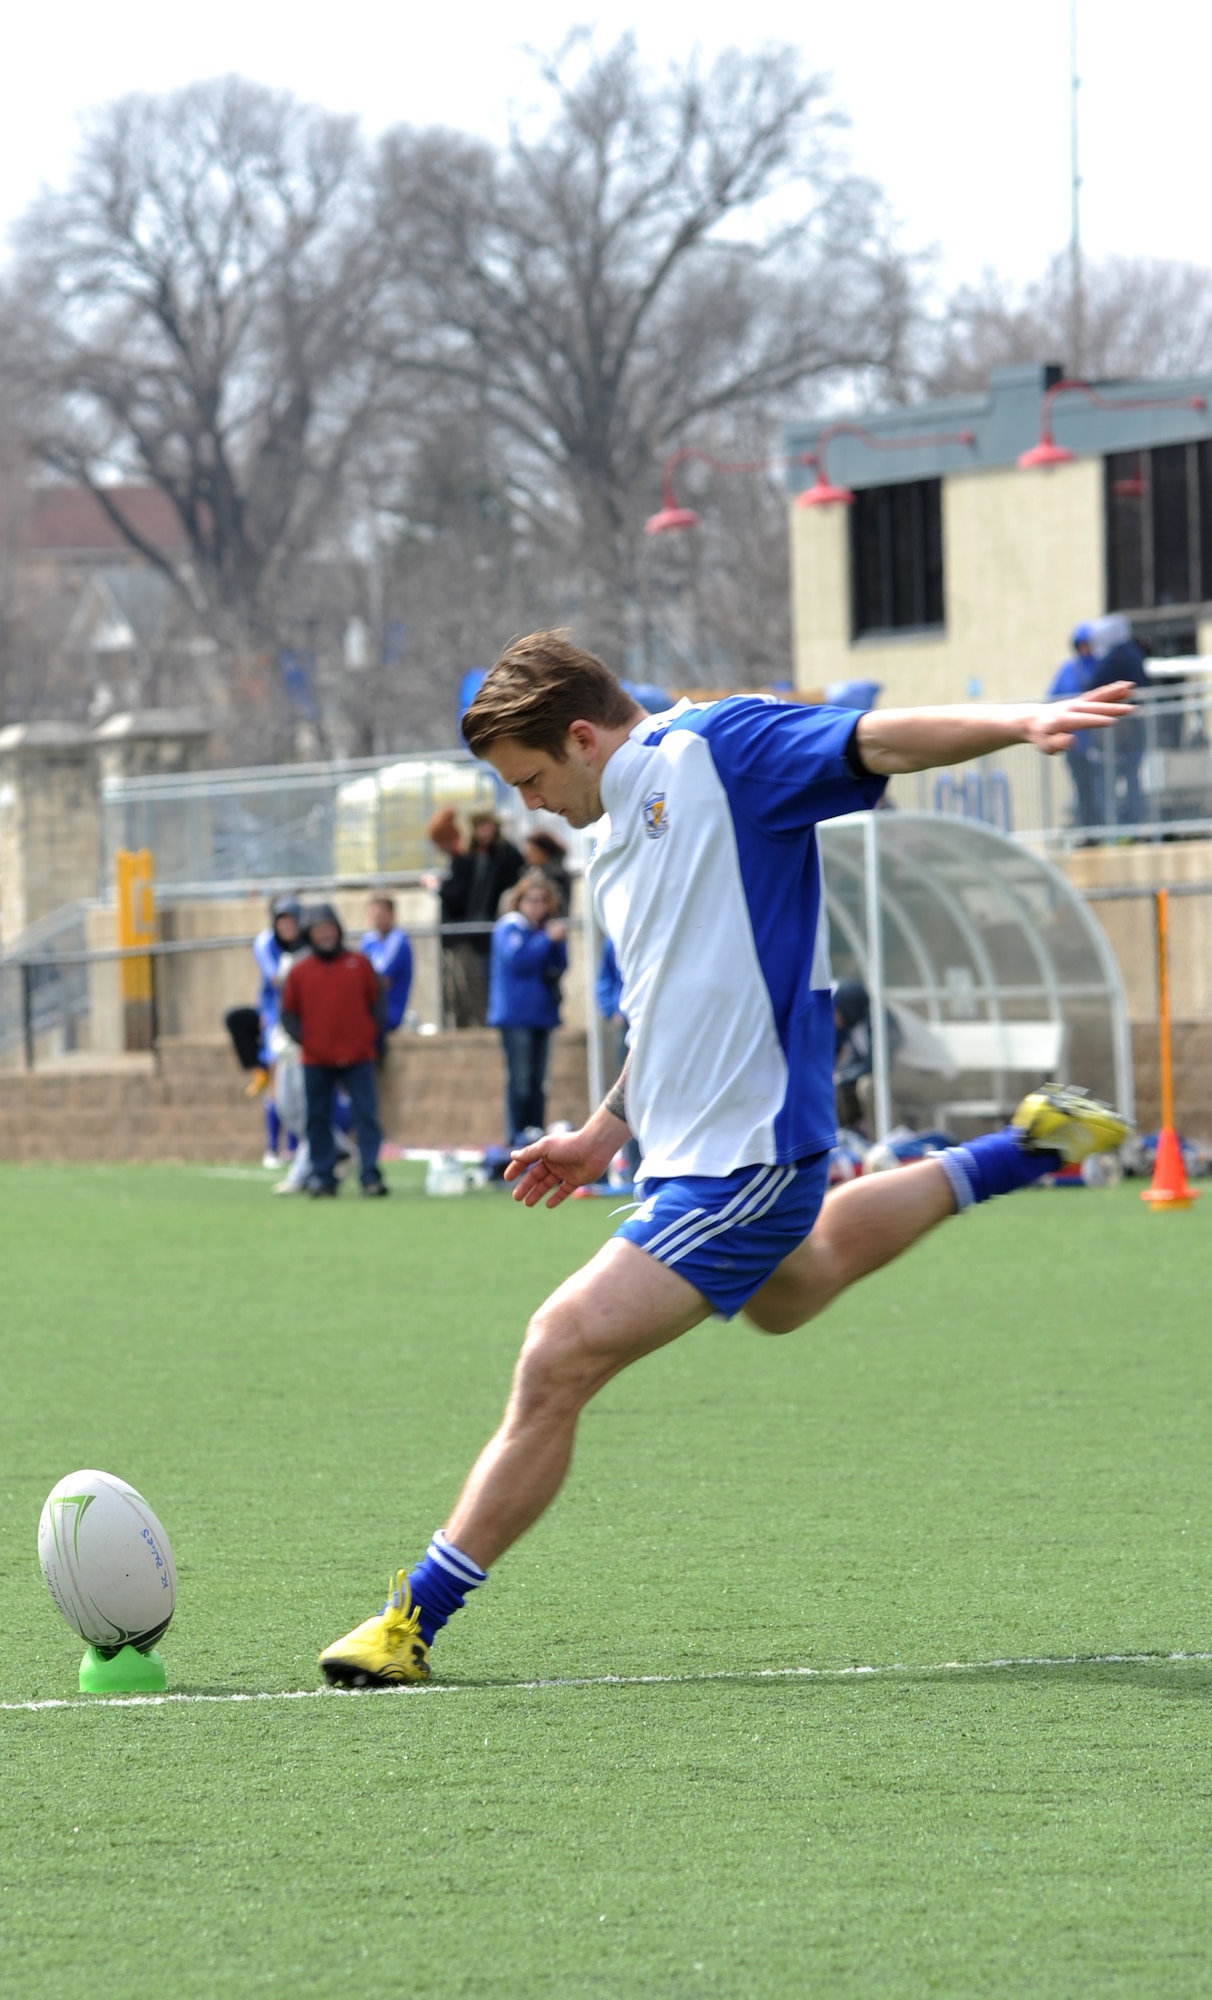 Eirik Hartley, Kansas City Blues Rugby Club player, kicks a successful 2-point conversion during a game against the University of Kansas Jayhawks in Kansas City, Mo., March 16, 2013. Rugby is a highly physical sport played with little protective equipment.  (U.S. Air Force photo by Senior Airman Brigitte N. Brantley/Released)